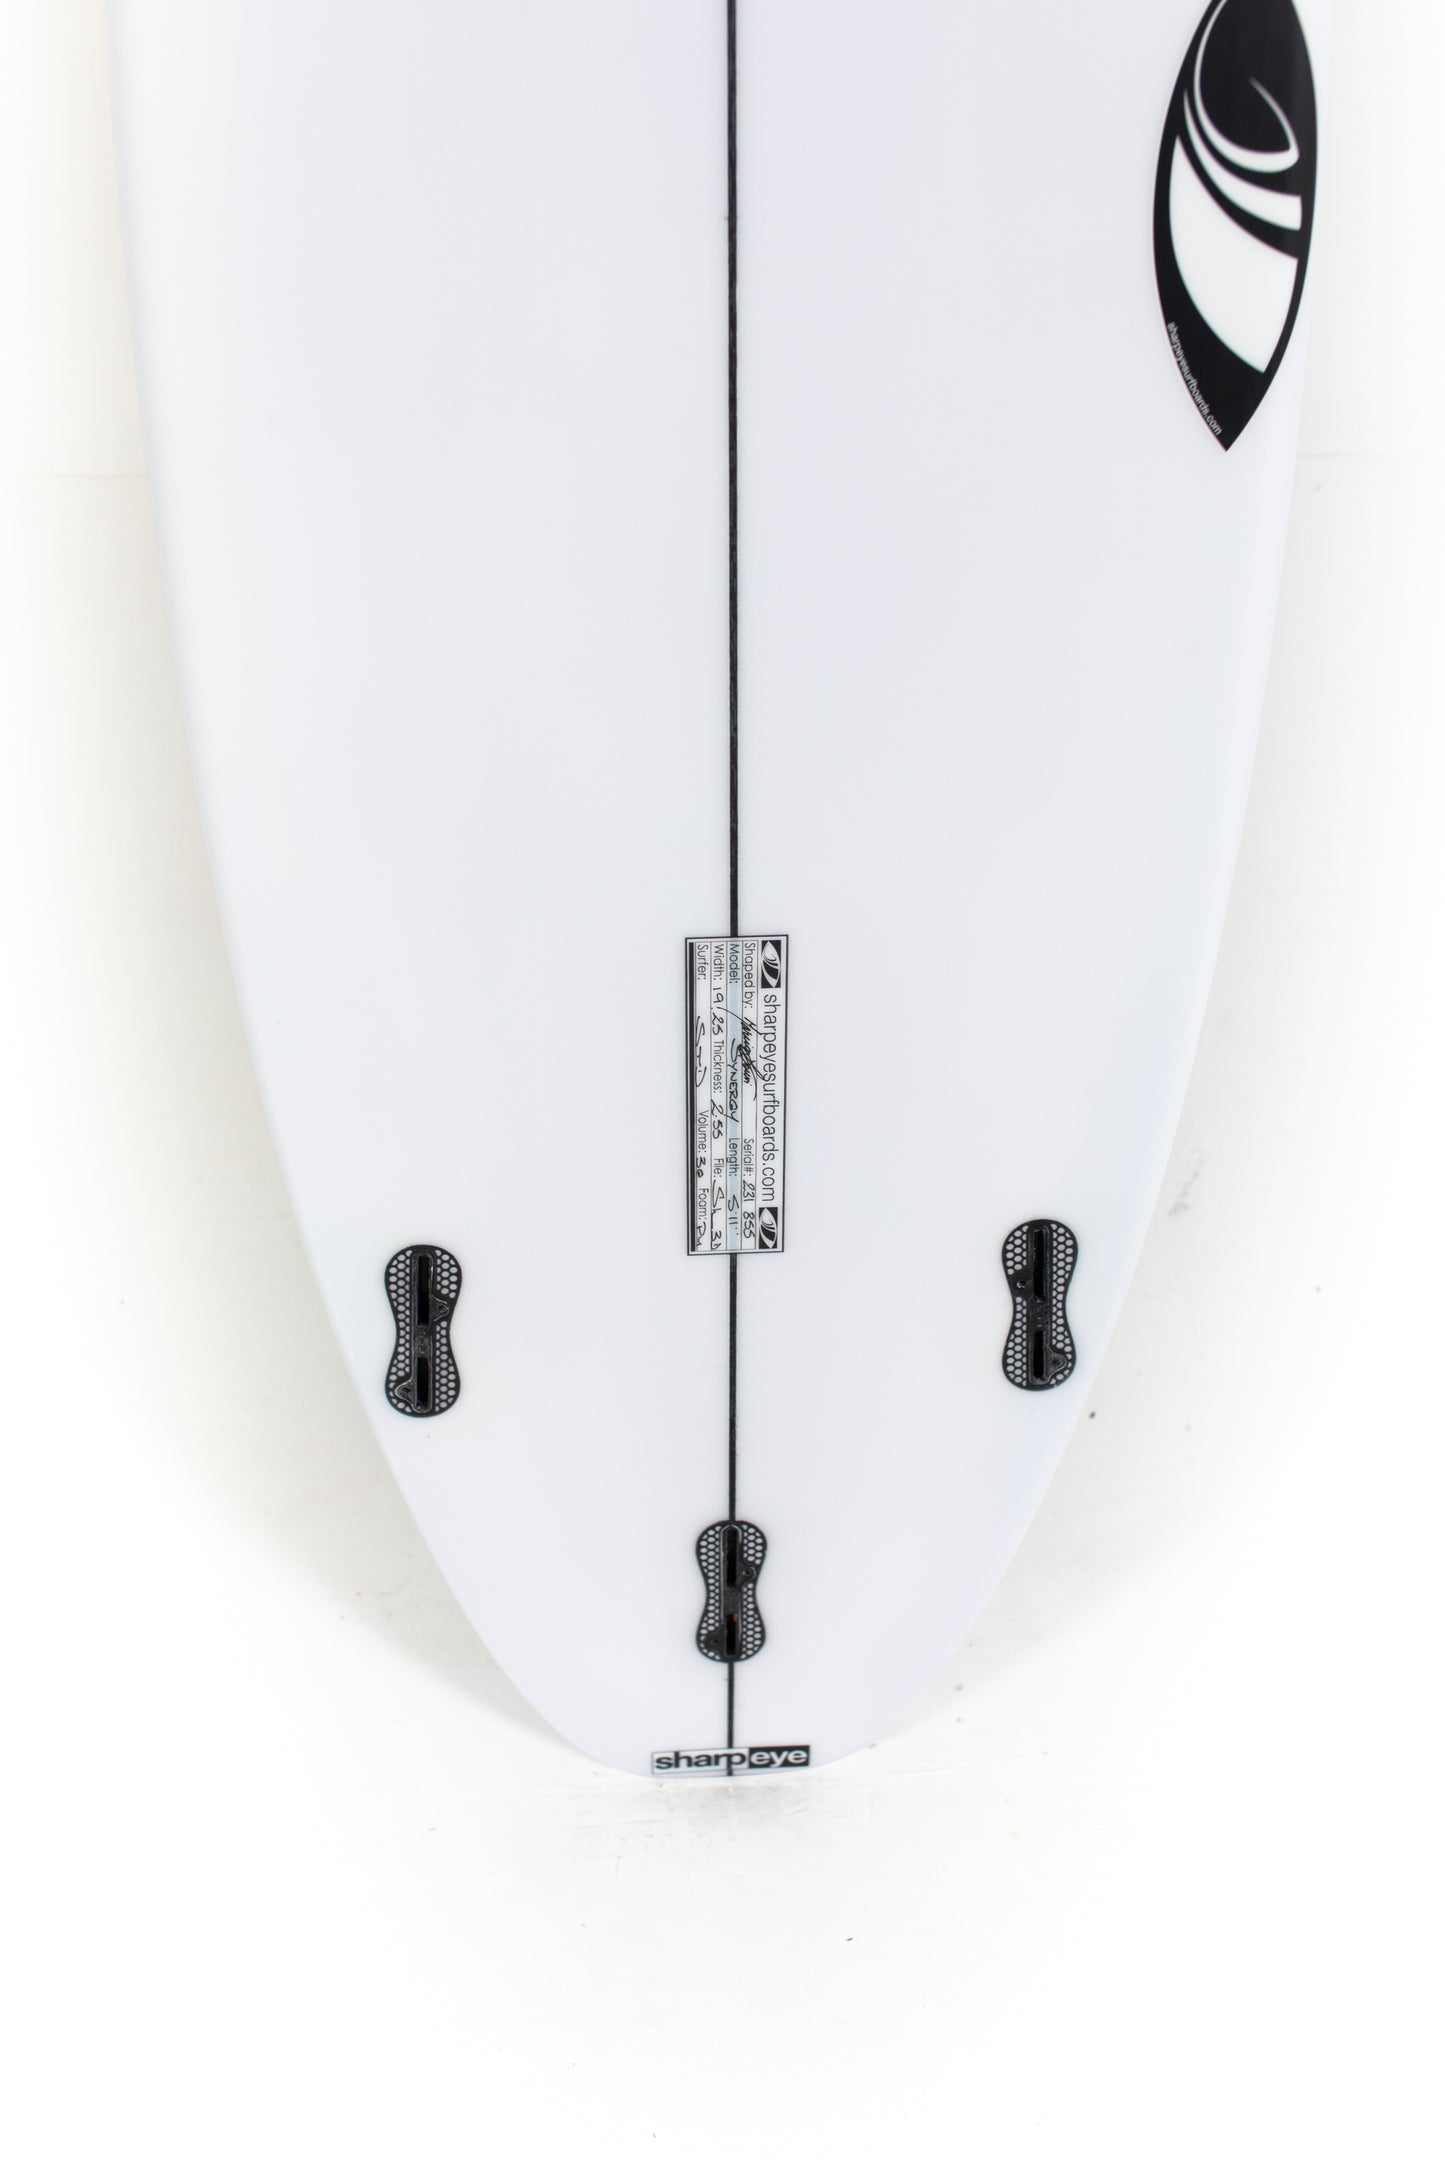 Sharp Eye Surfboards - Synergy by Marcio Zouvi | Shop at PUKAS